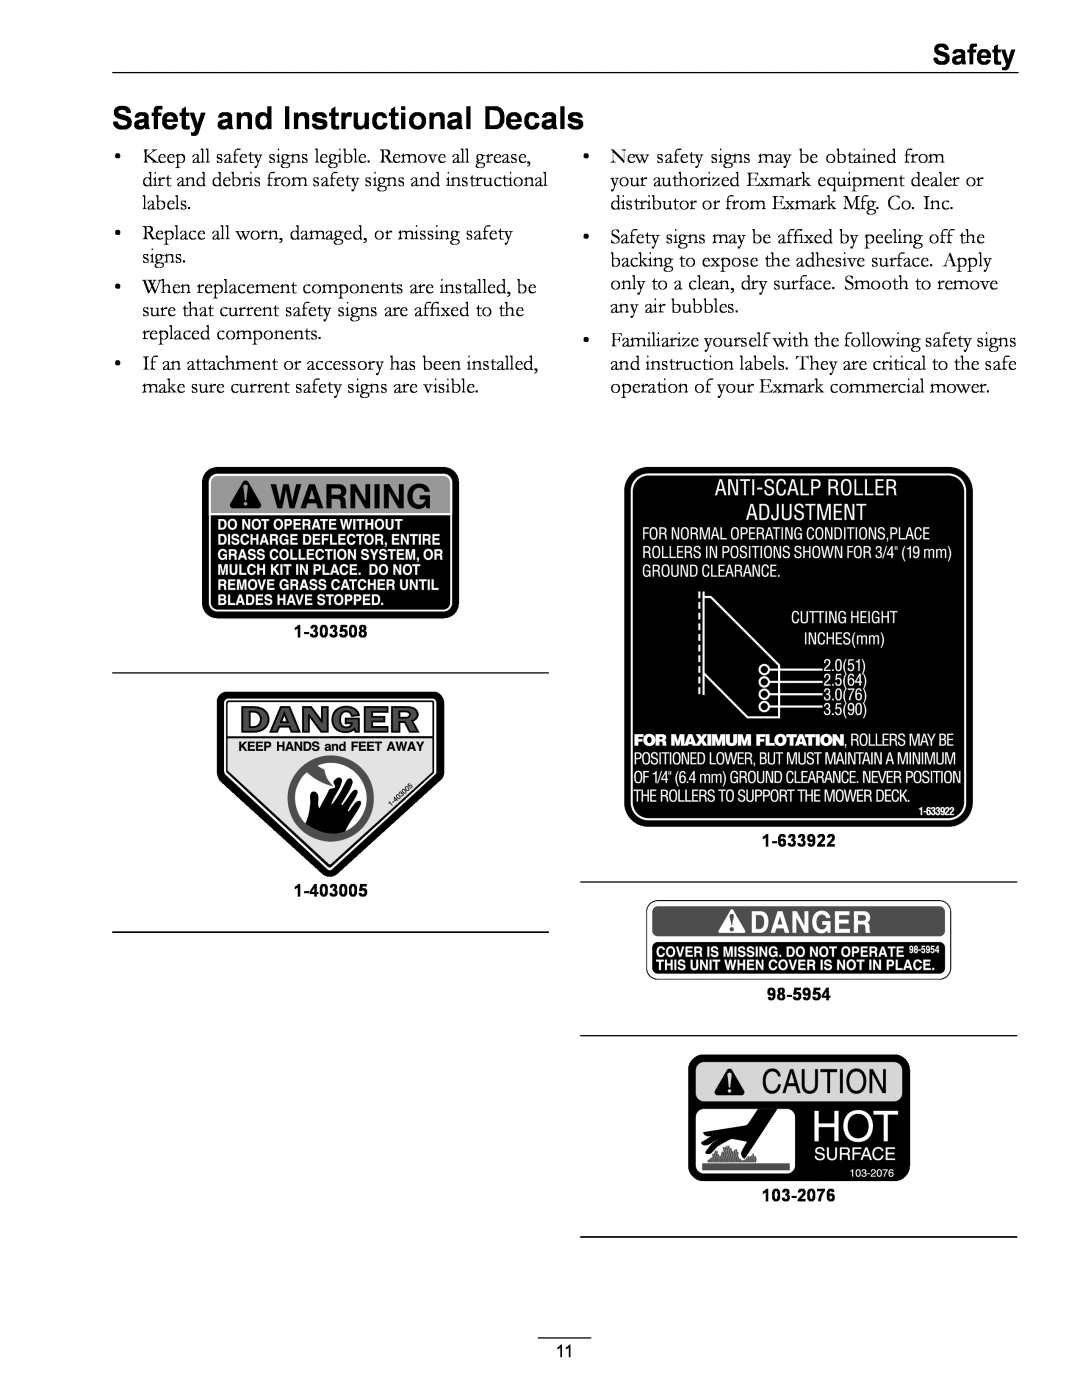 Exmark 4500-507 manual Safety and Instructional Decals 